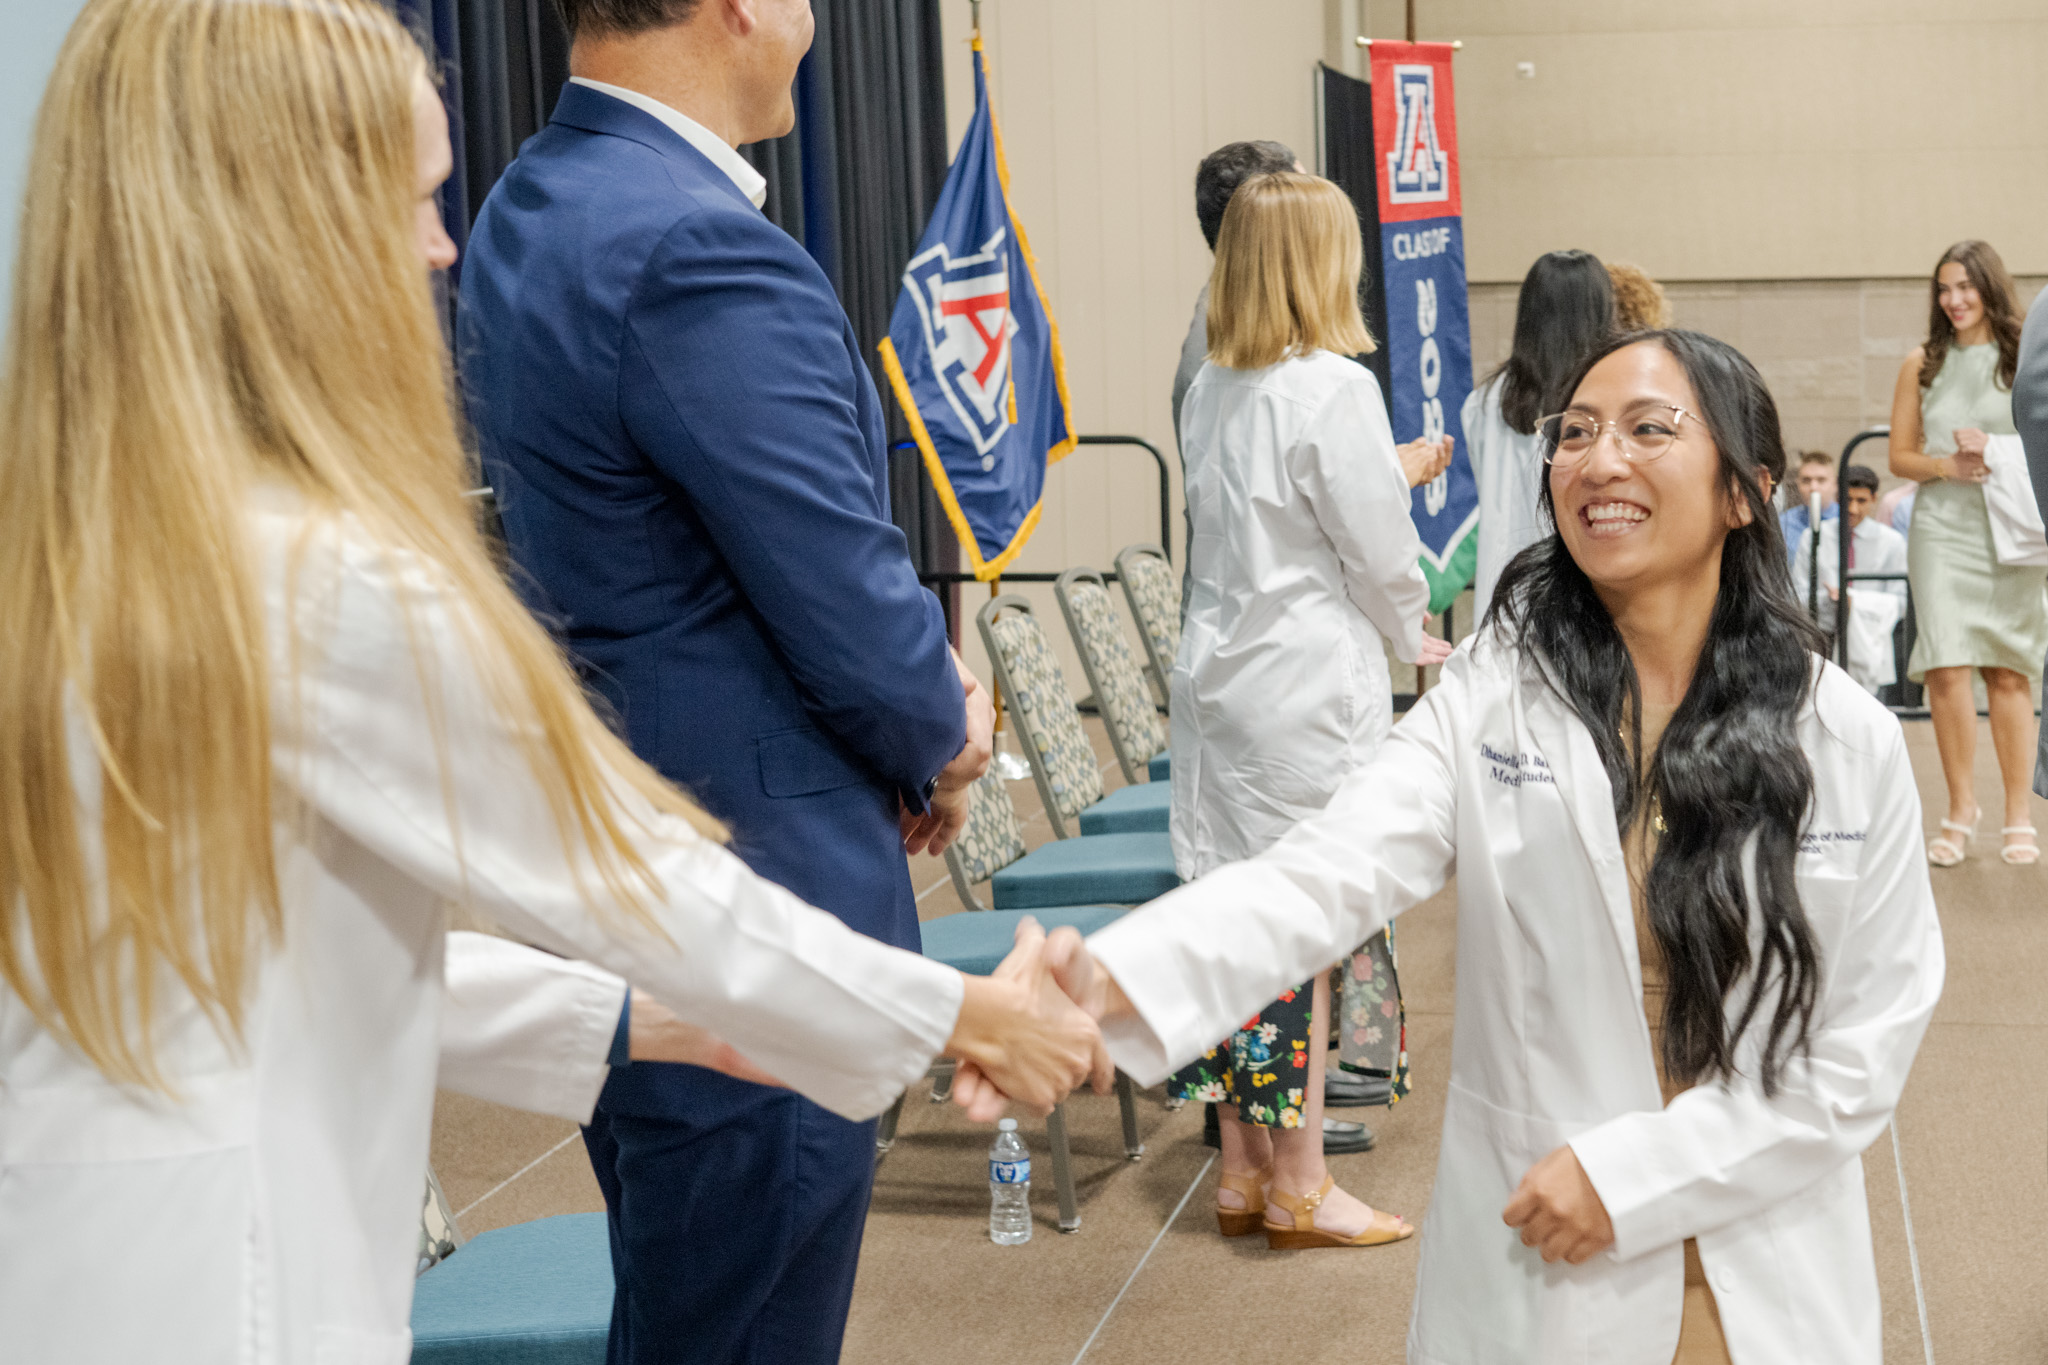 Friday, July 19, the Class of 2028 celebrated their White Coat Ceremony